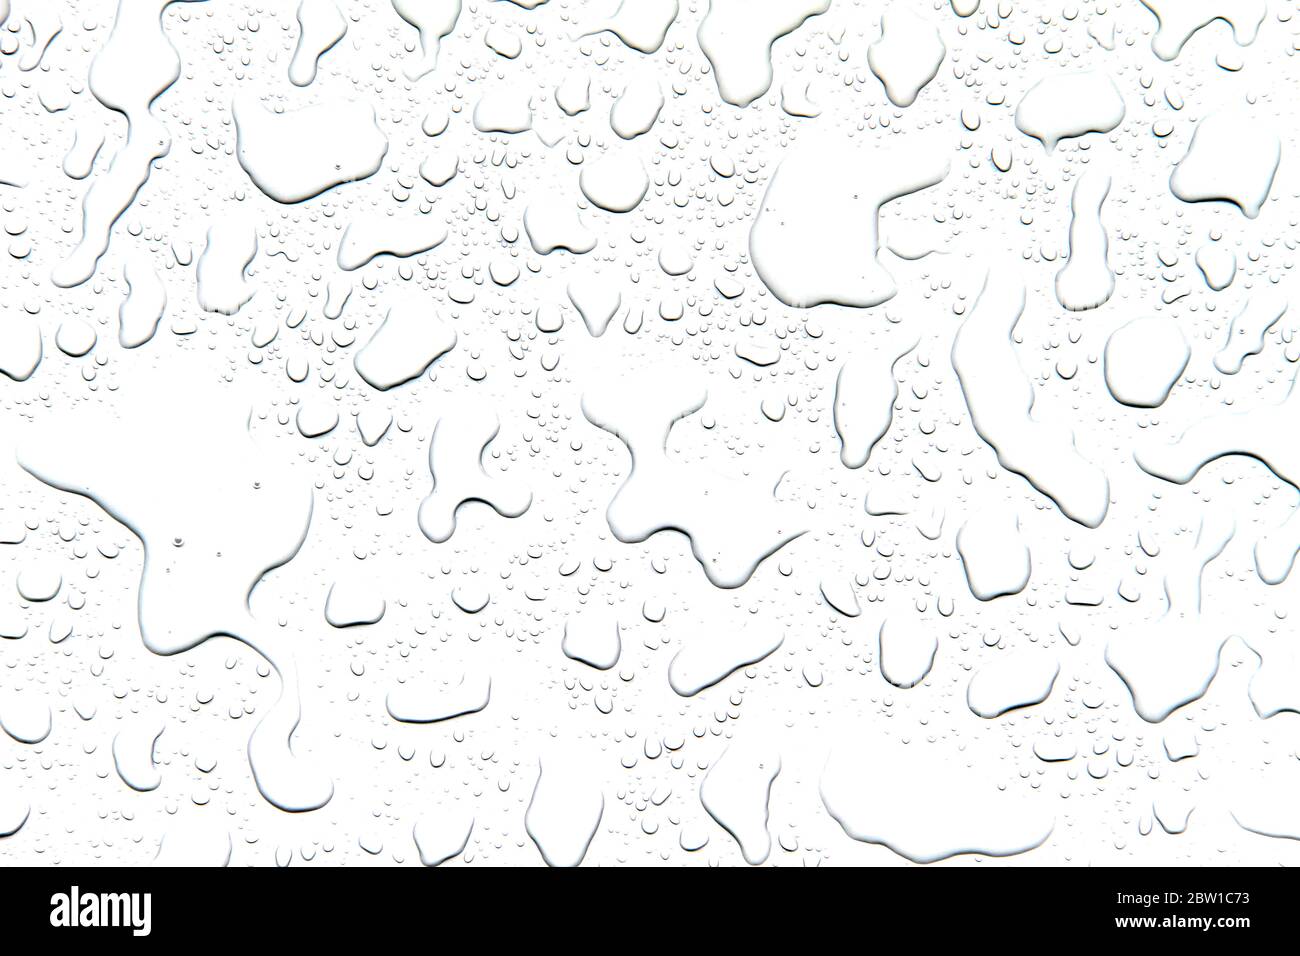 The concept of water drops on a white background Stock Photo